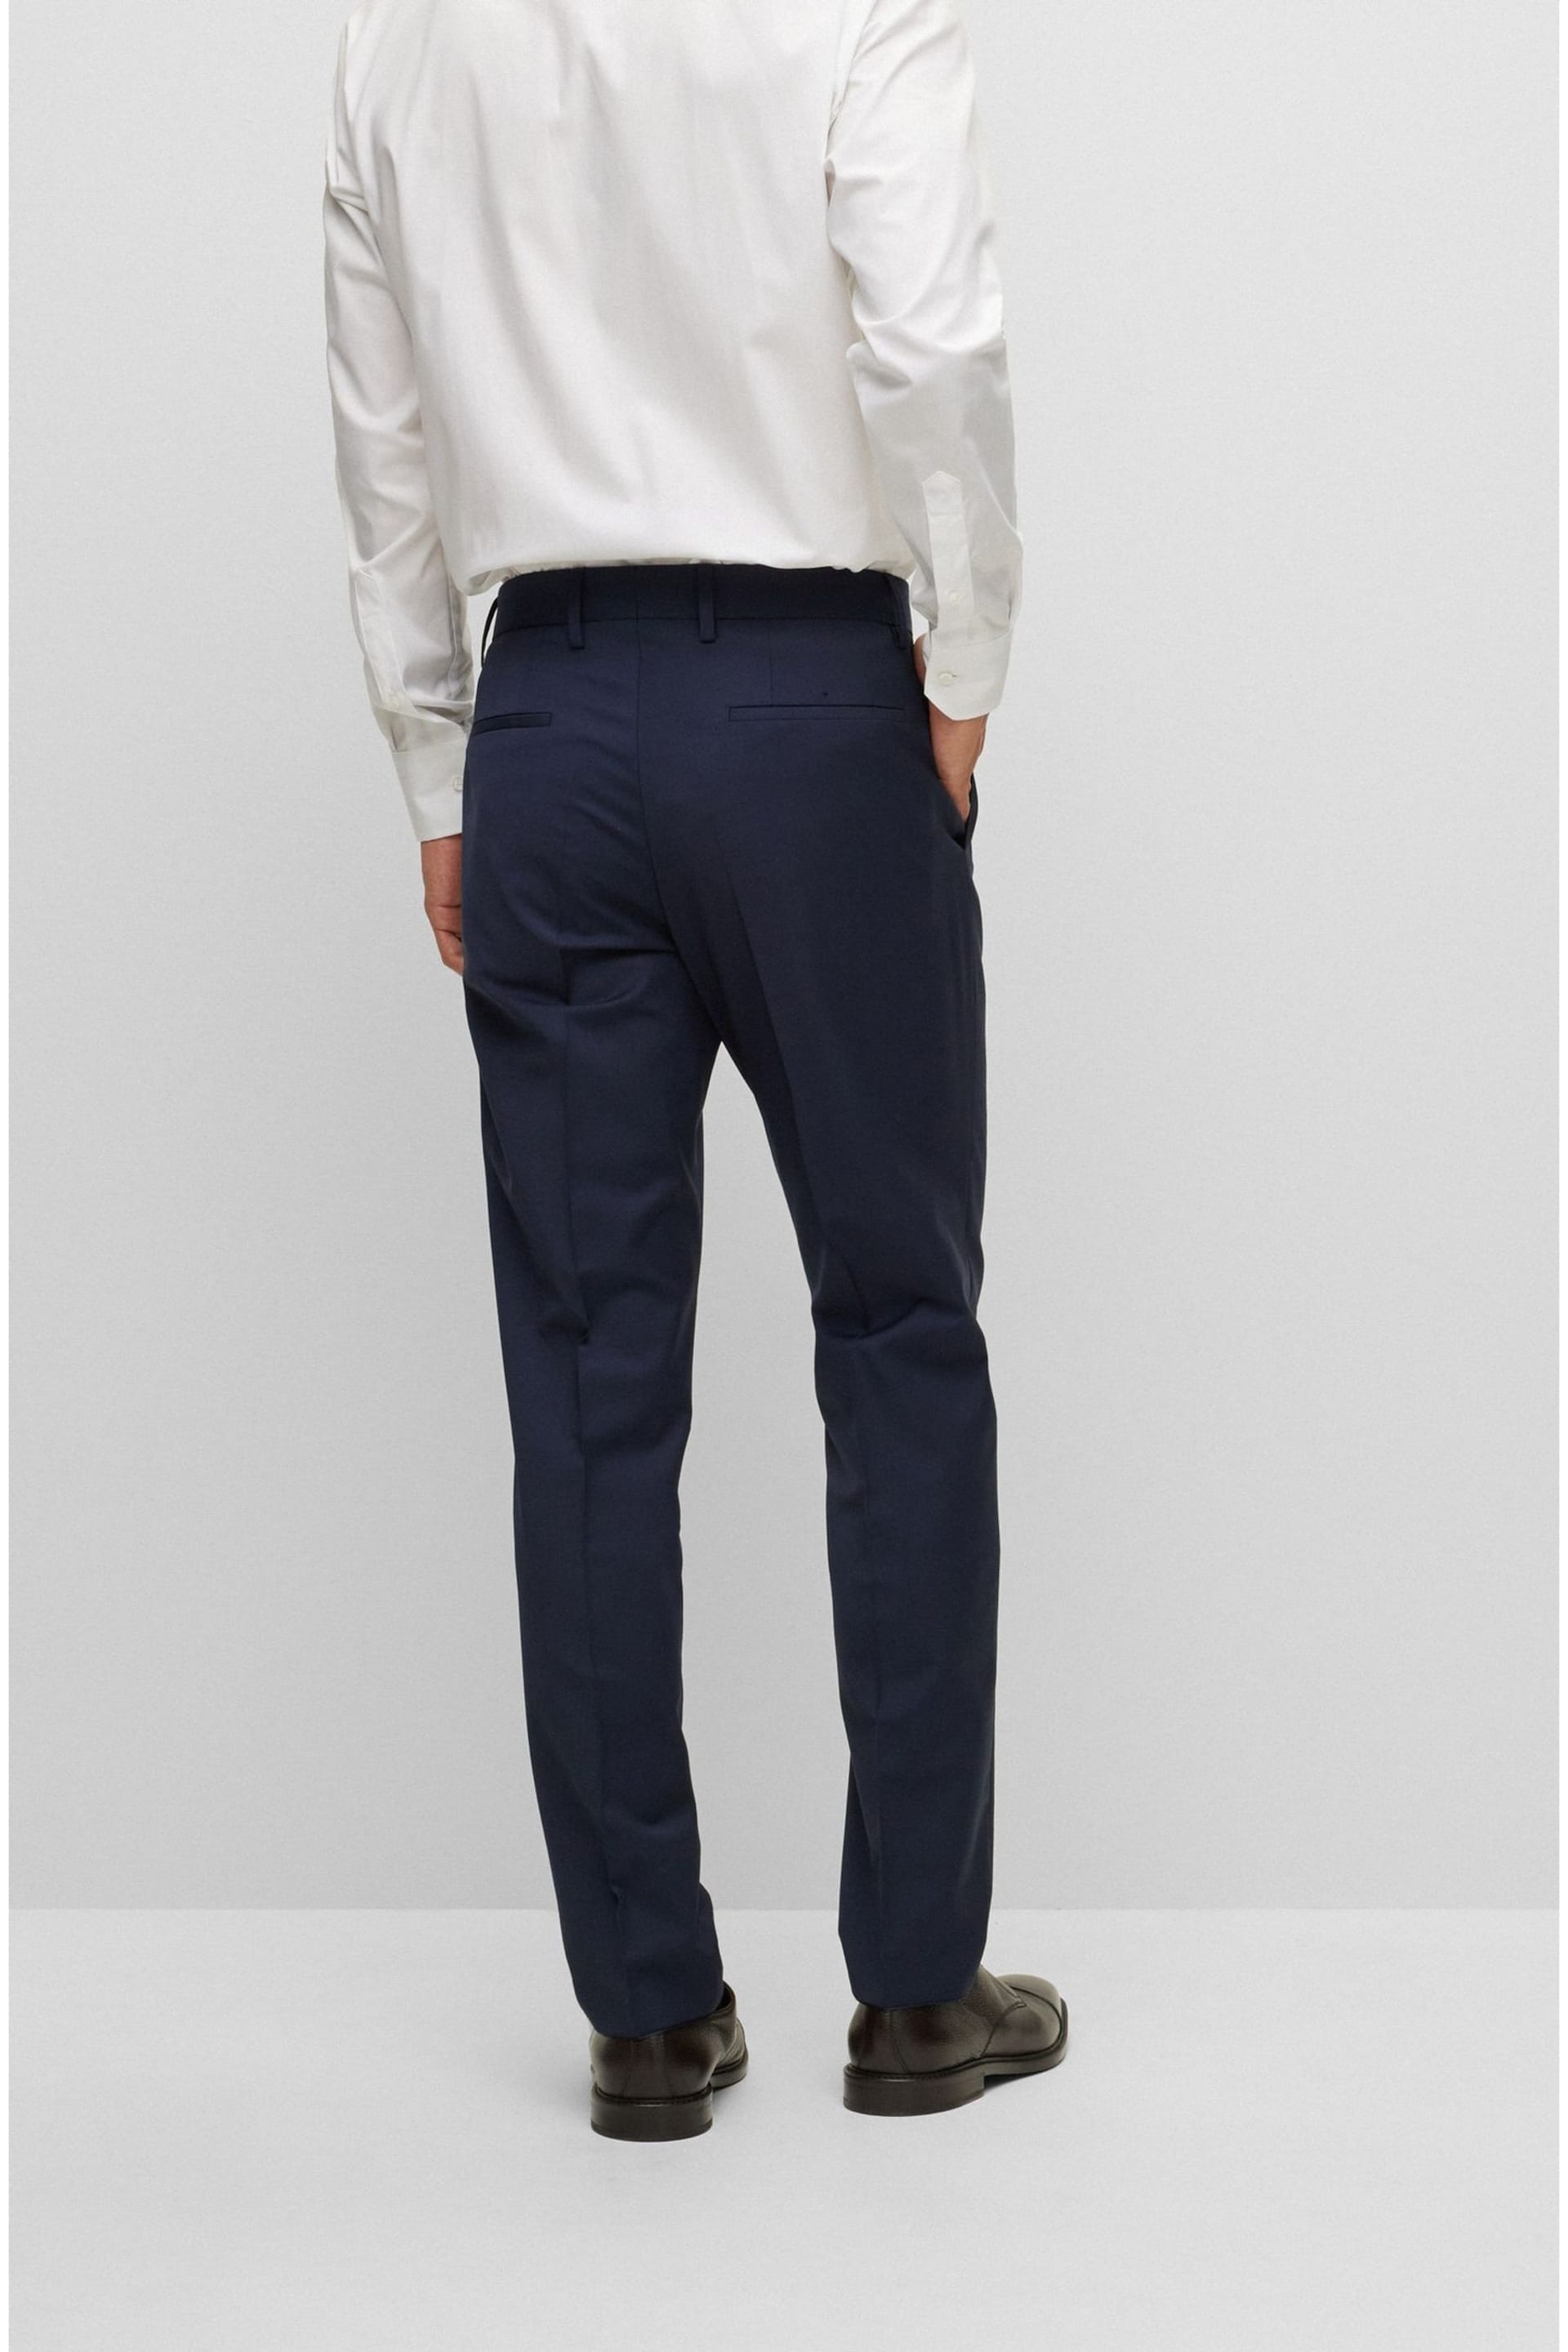 BOSS Blue Slim Fit Suit :Trousers - Image 2 of 7